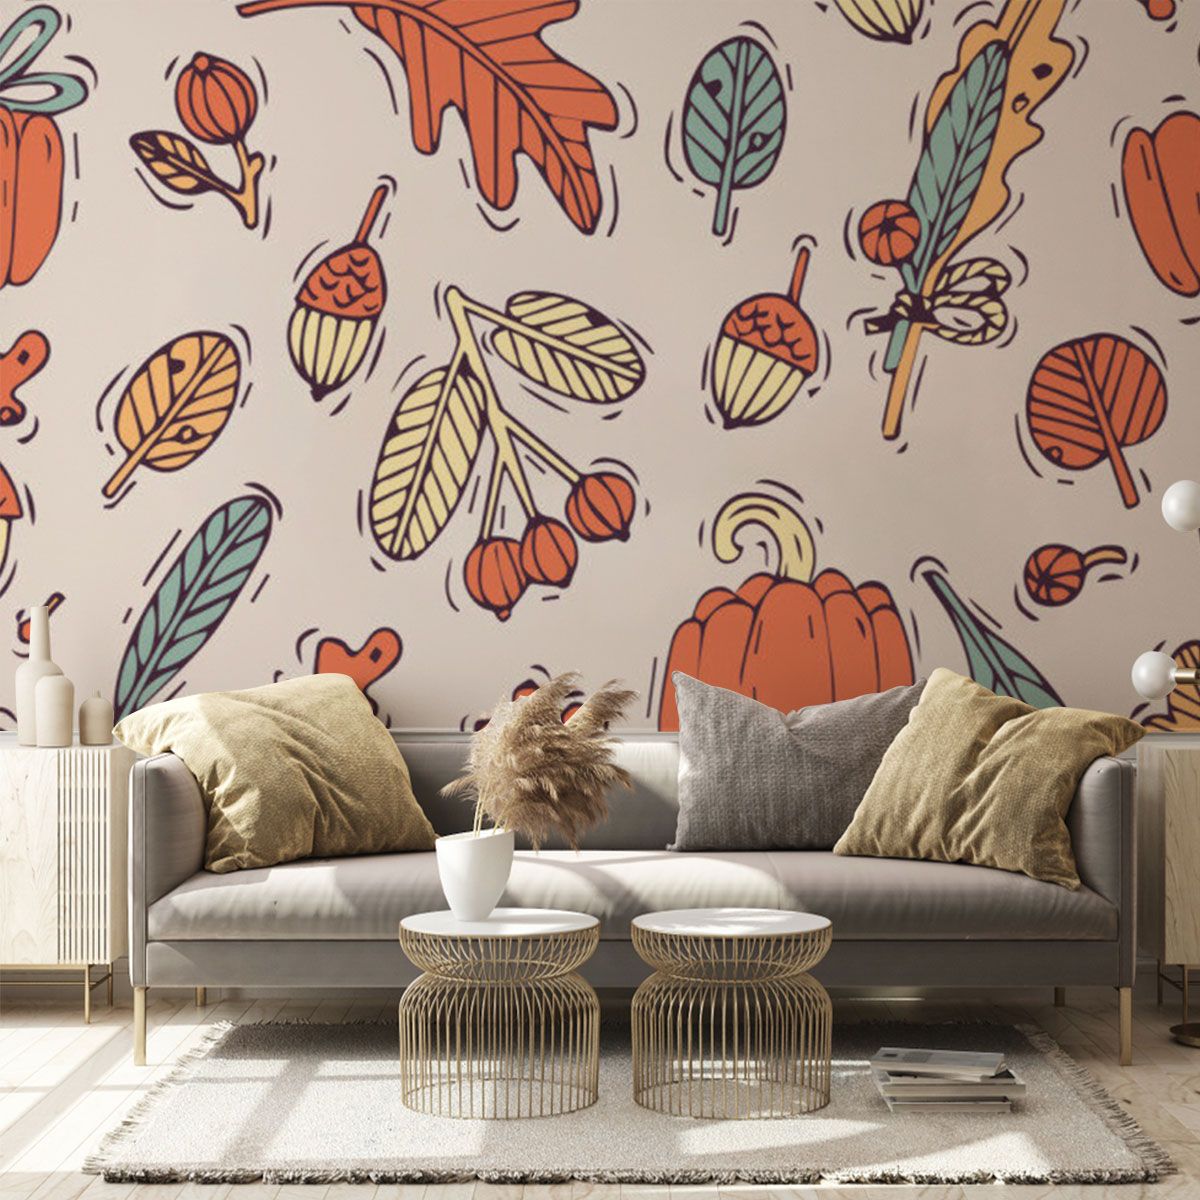 Orange And Blue Autumn Wall Mural